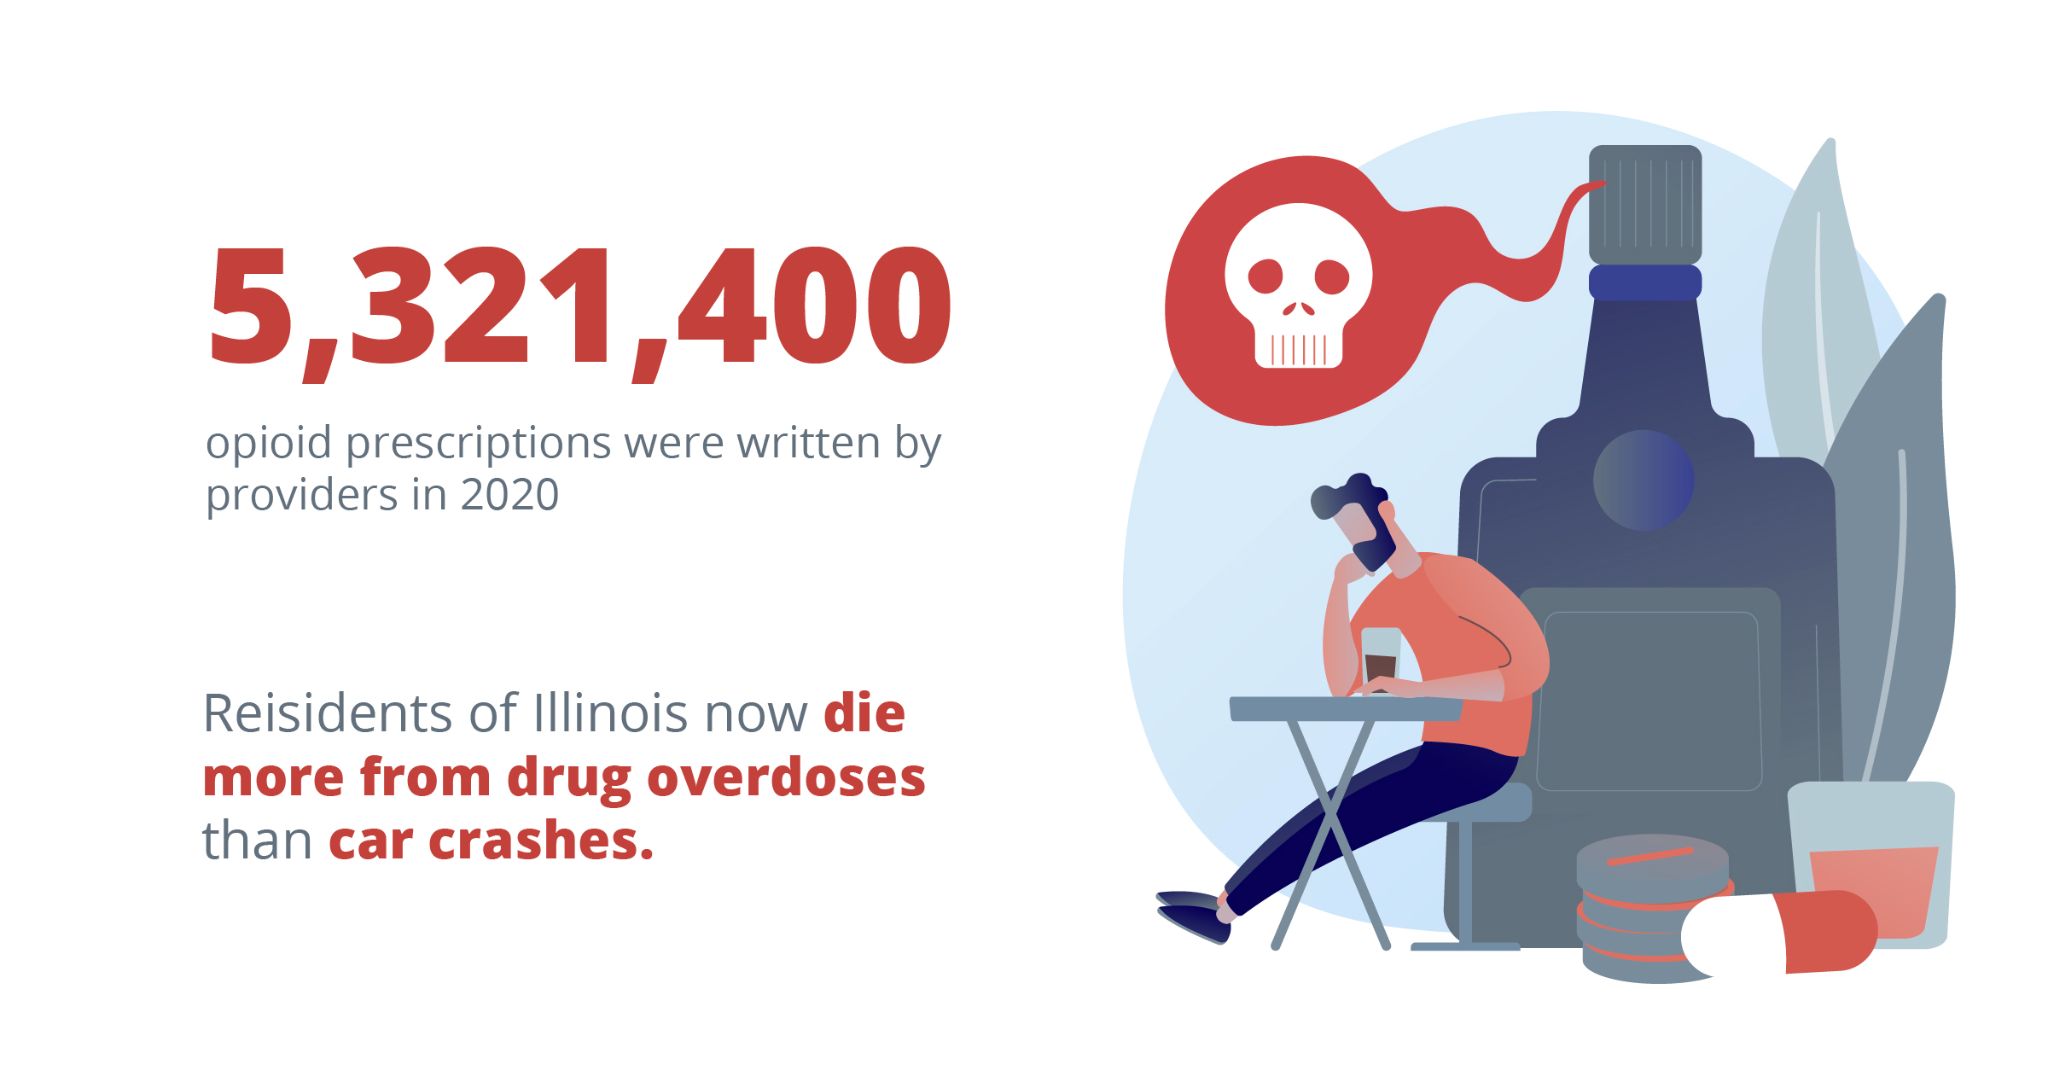 5,321,400 opioid prescriptions were written by providers in 2020. Residents of illinois now die more from drug overdoses than car crashes.